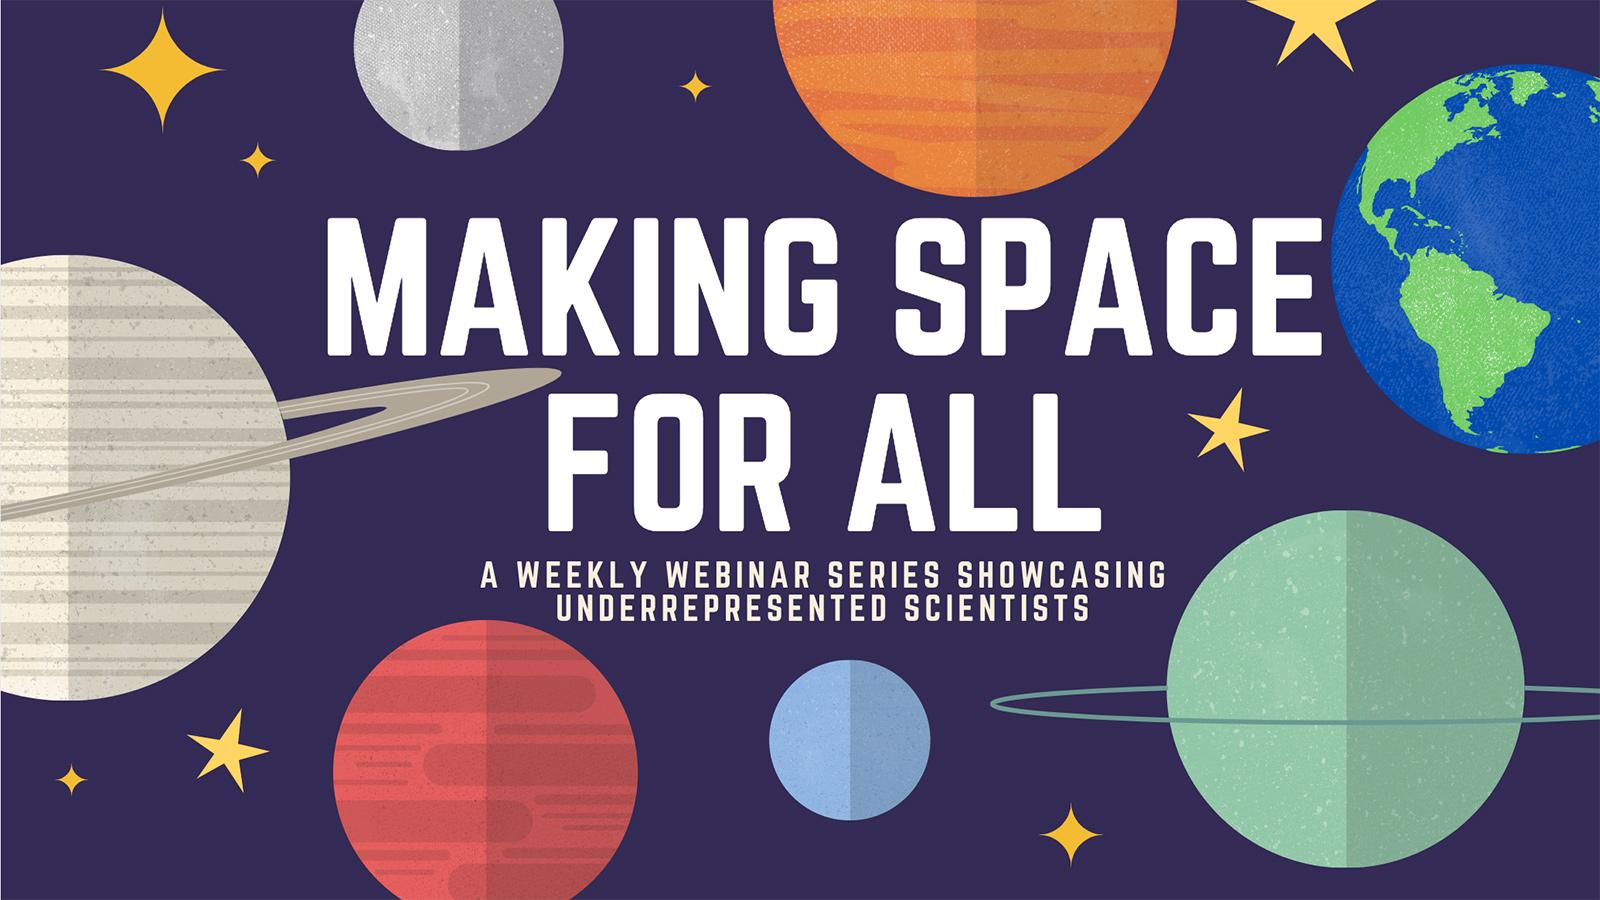 Making Space for All - A weekly webinar series showcasing scientists from underrepresented groups